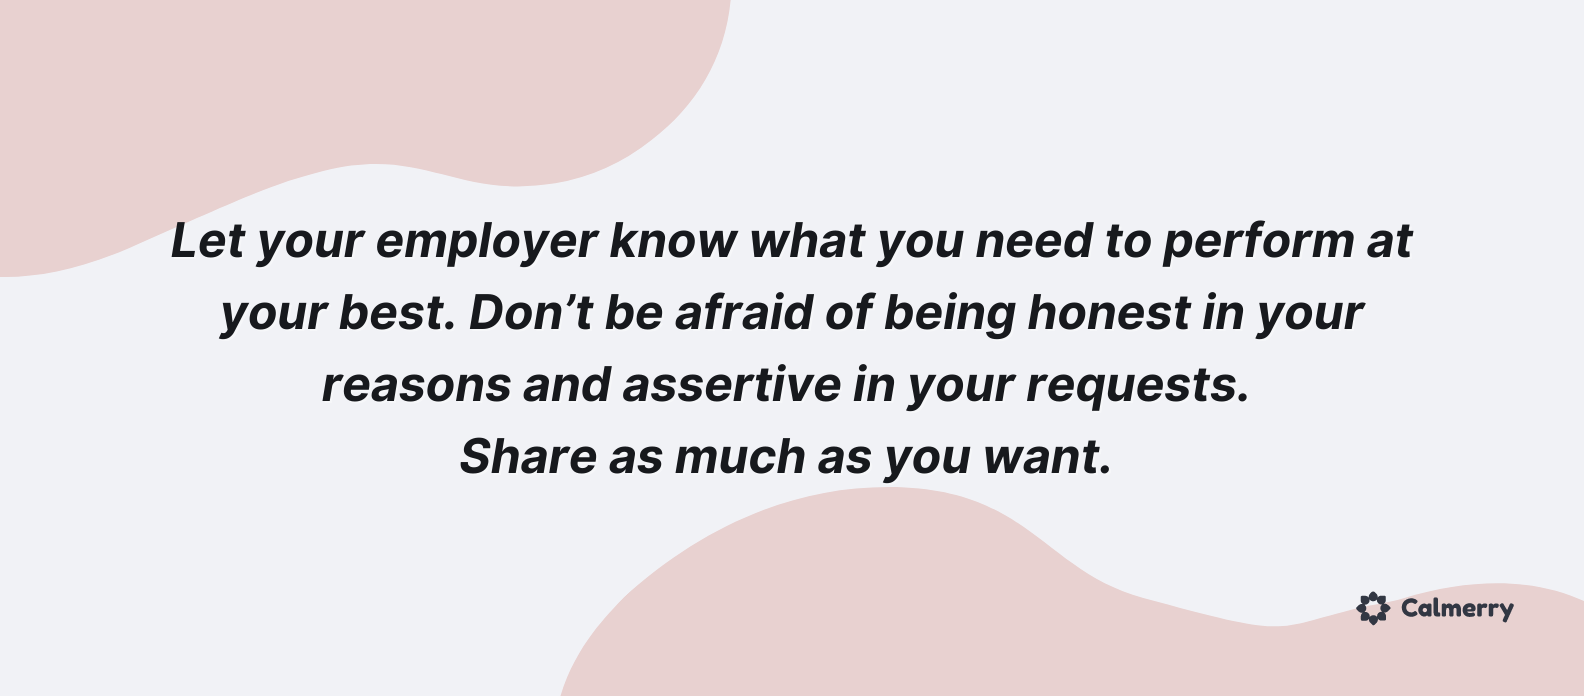 Let your employer know what you need to perform at your best. Don’t be afraid of being honest in your reasons and assertive in your requests. Share as much as you want. 